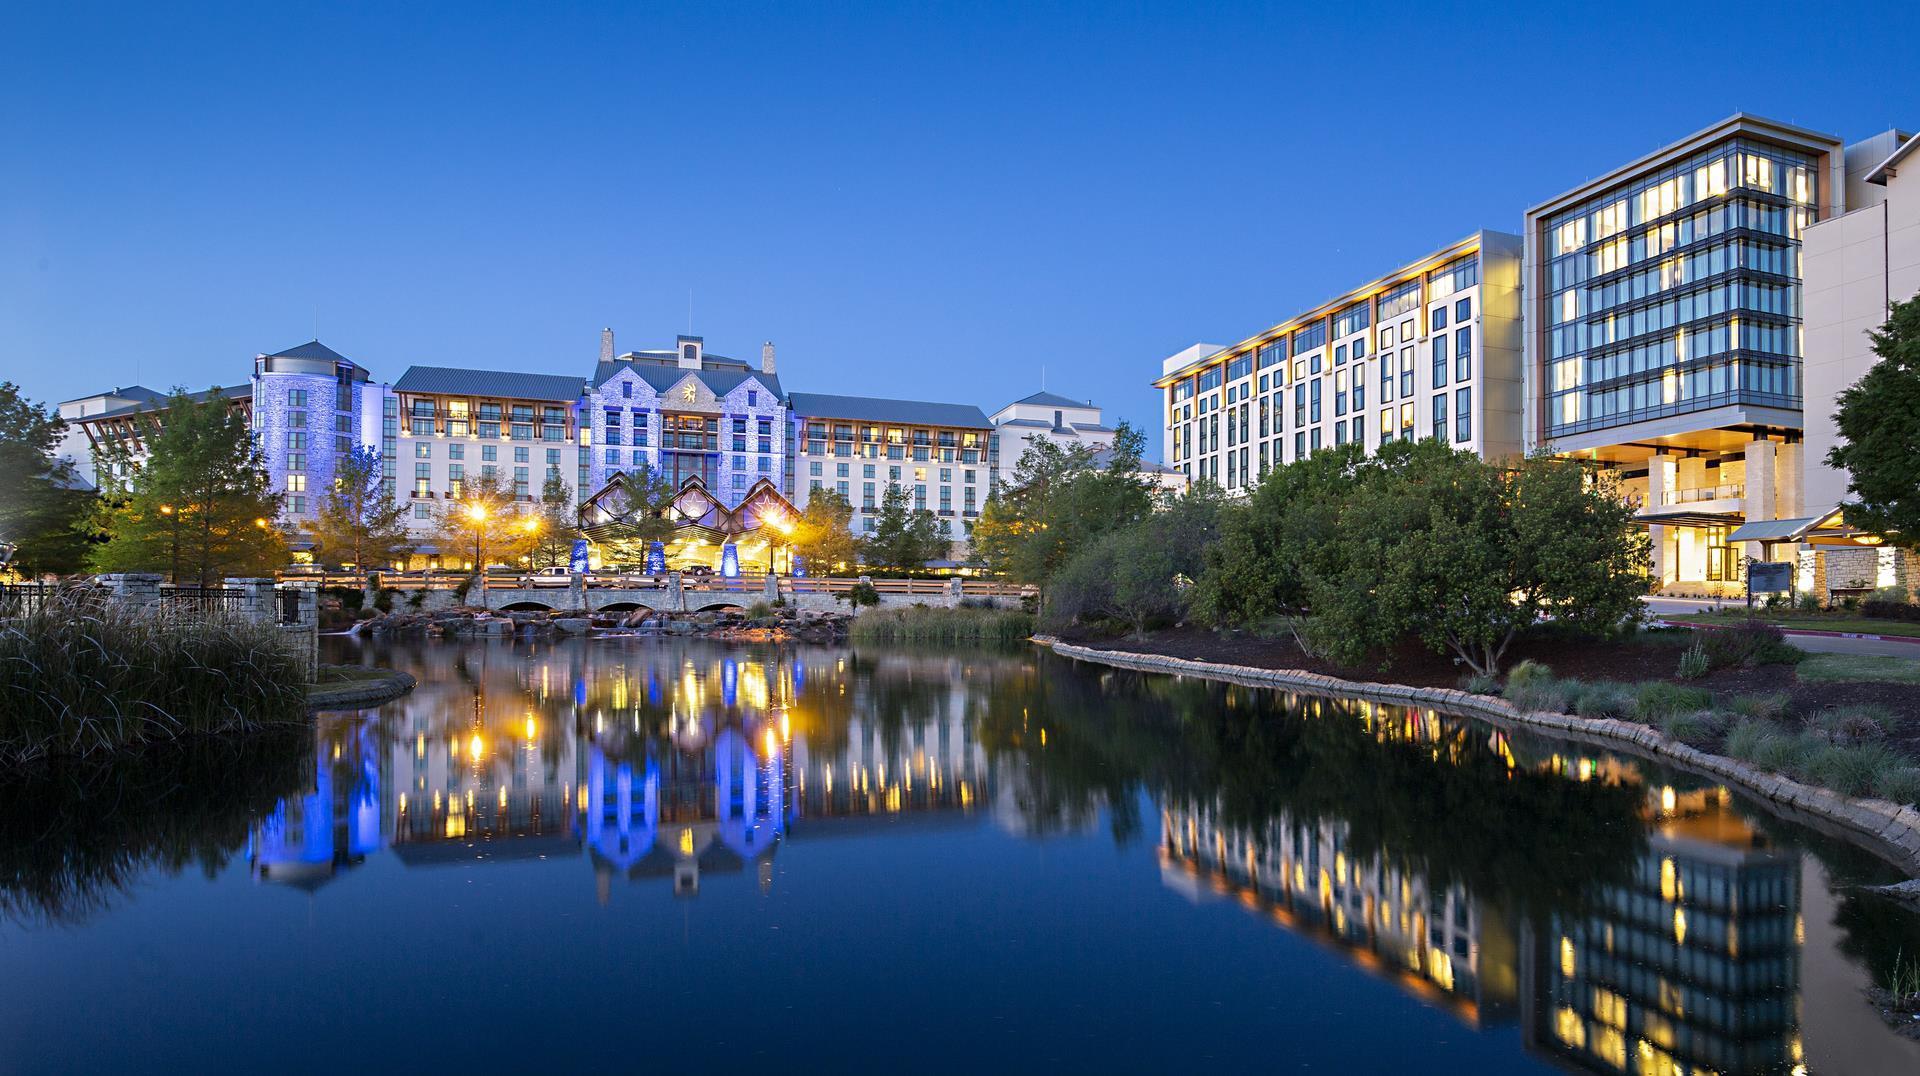 Gaylord Texan Resort & Convention Center in Grapevine, TX